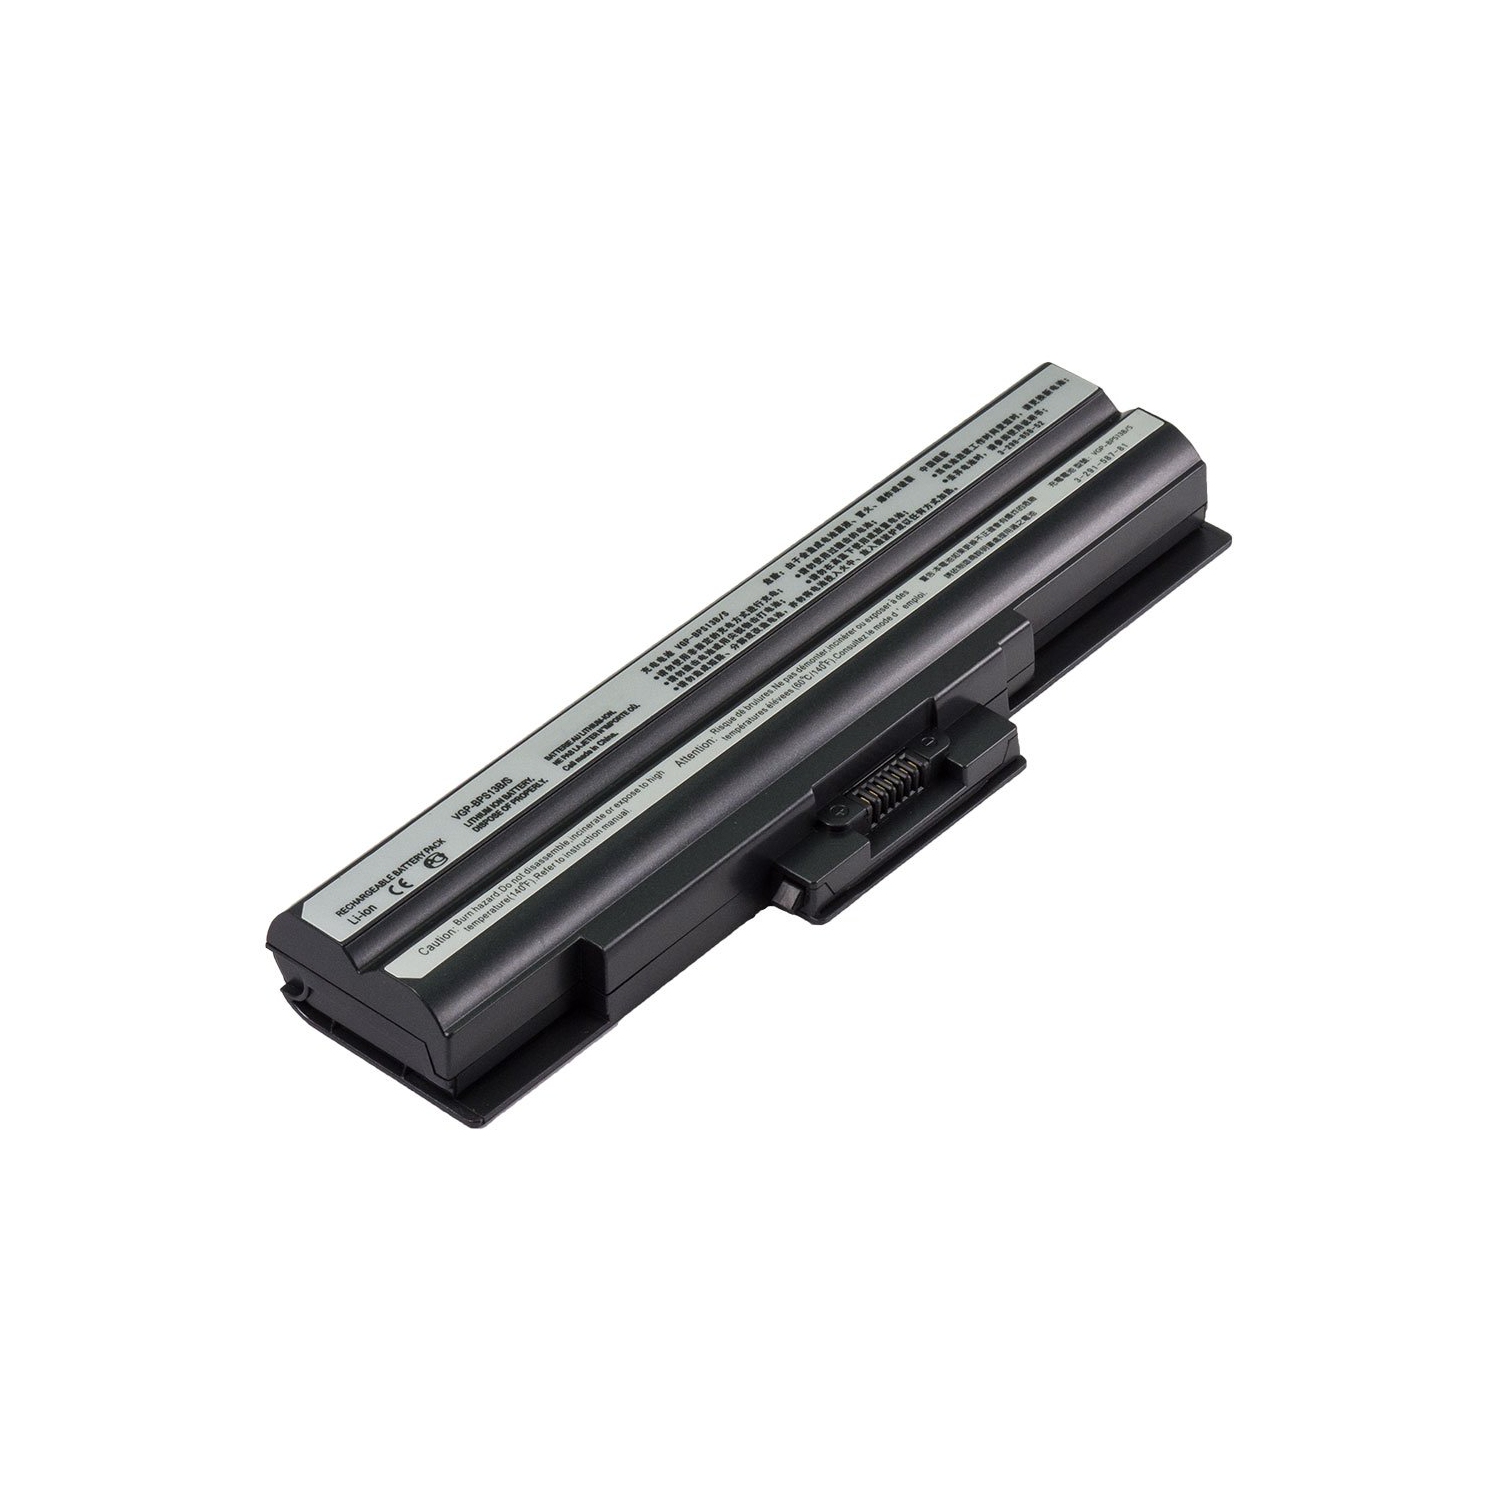 Laptop Battery Replacement for Sony VAIO VGN-NS20E/P, VGP-BPS13, VGP-BPS13/S, VGP-BPS13A/Q, VGP-BPS13B/B, VGP-BSP13/S